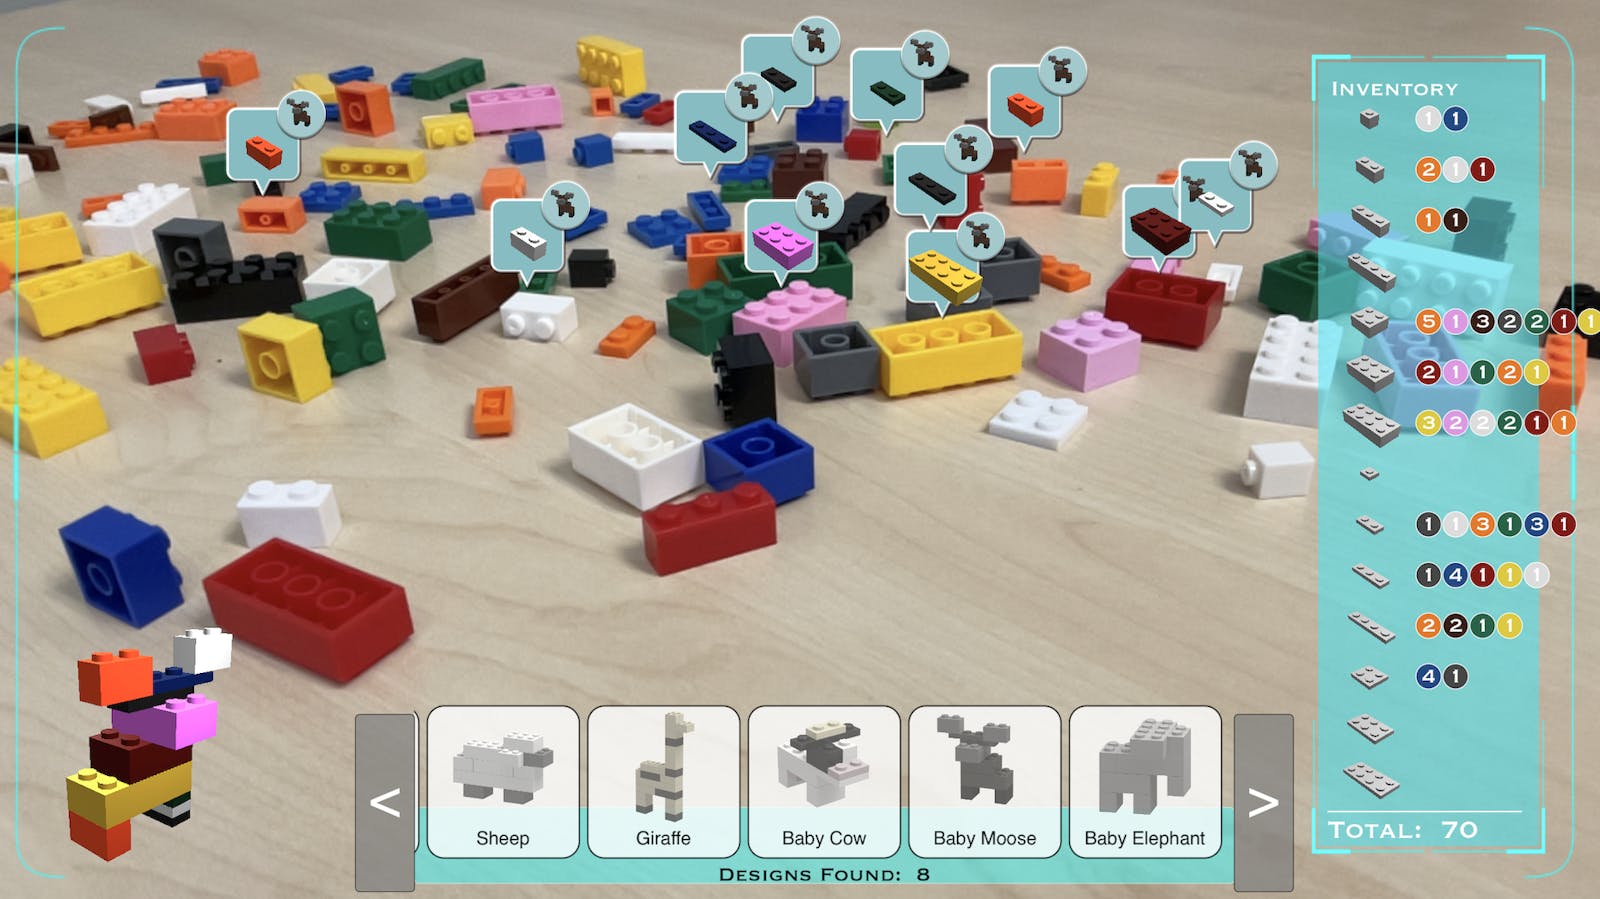 A look at the Peceptus Lego demo. Tagged pieces can be used to build a specific model. Credit: Singulos Research.